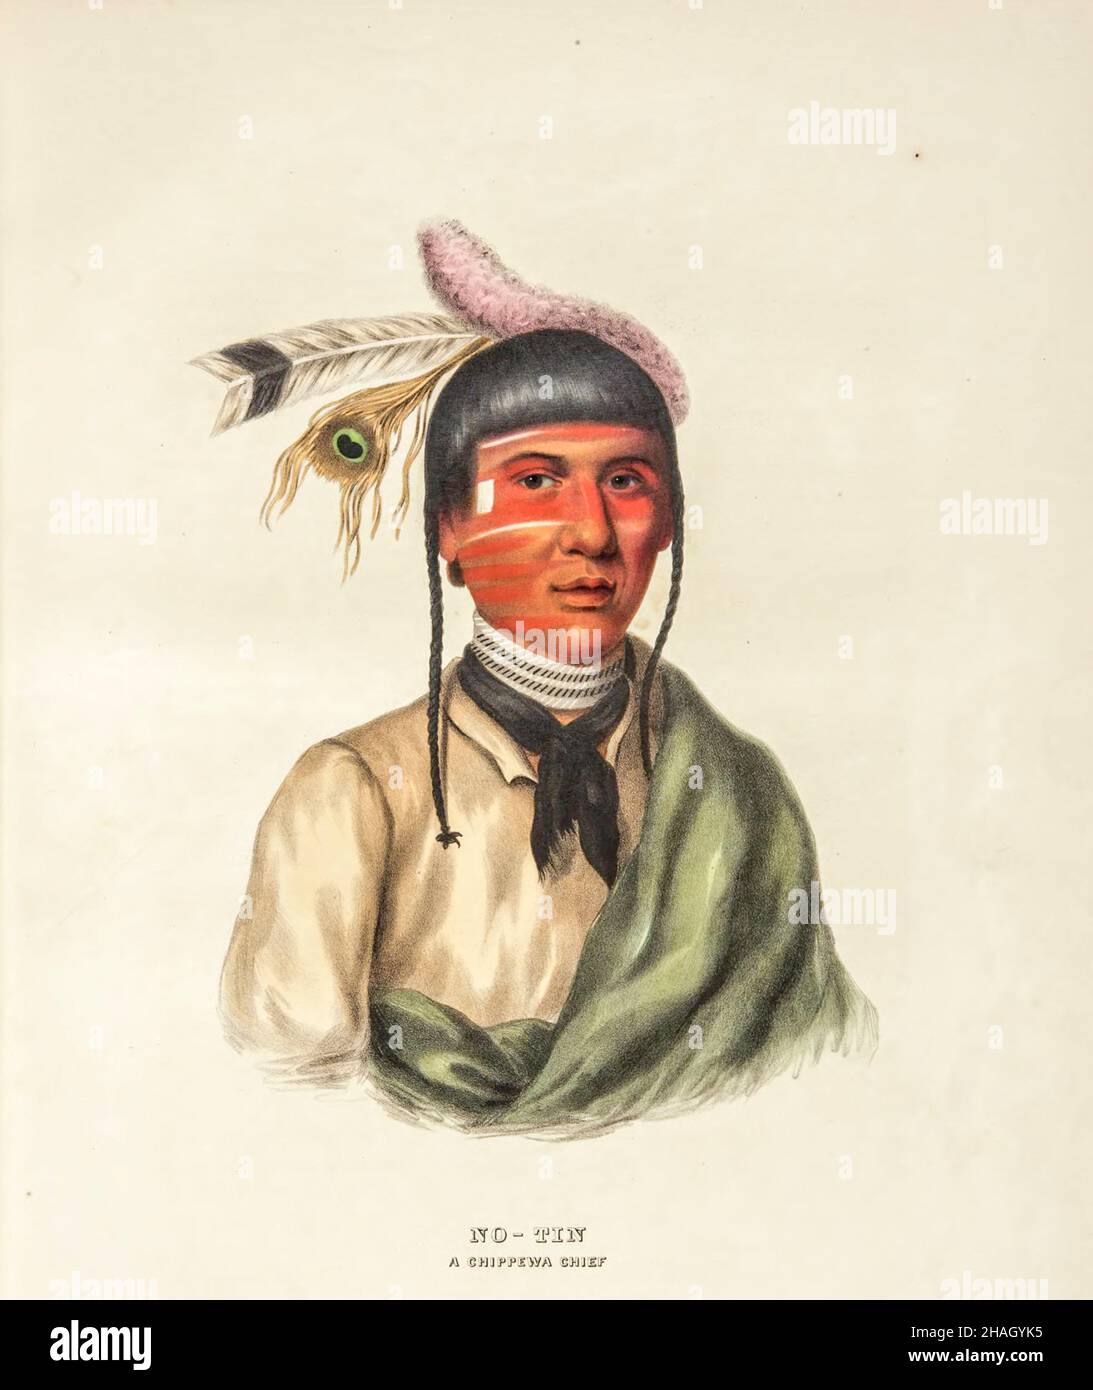 NO-TIN. A CHIPPEWA CHIEF. from the book ' History of the Indian Tribes of North America with biographical sketches and anecdotes of the principal chiefs. ' Volume 3 of 3 by Thomas Loraine,McKenney, and James Hall Esq. Published in 1844 Painted by Charles Bird King Stock Photo